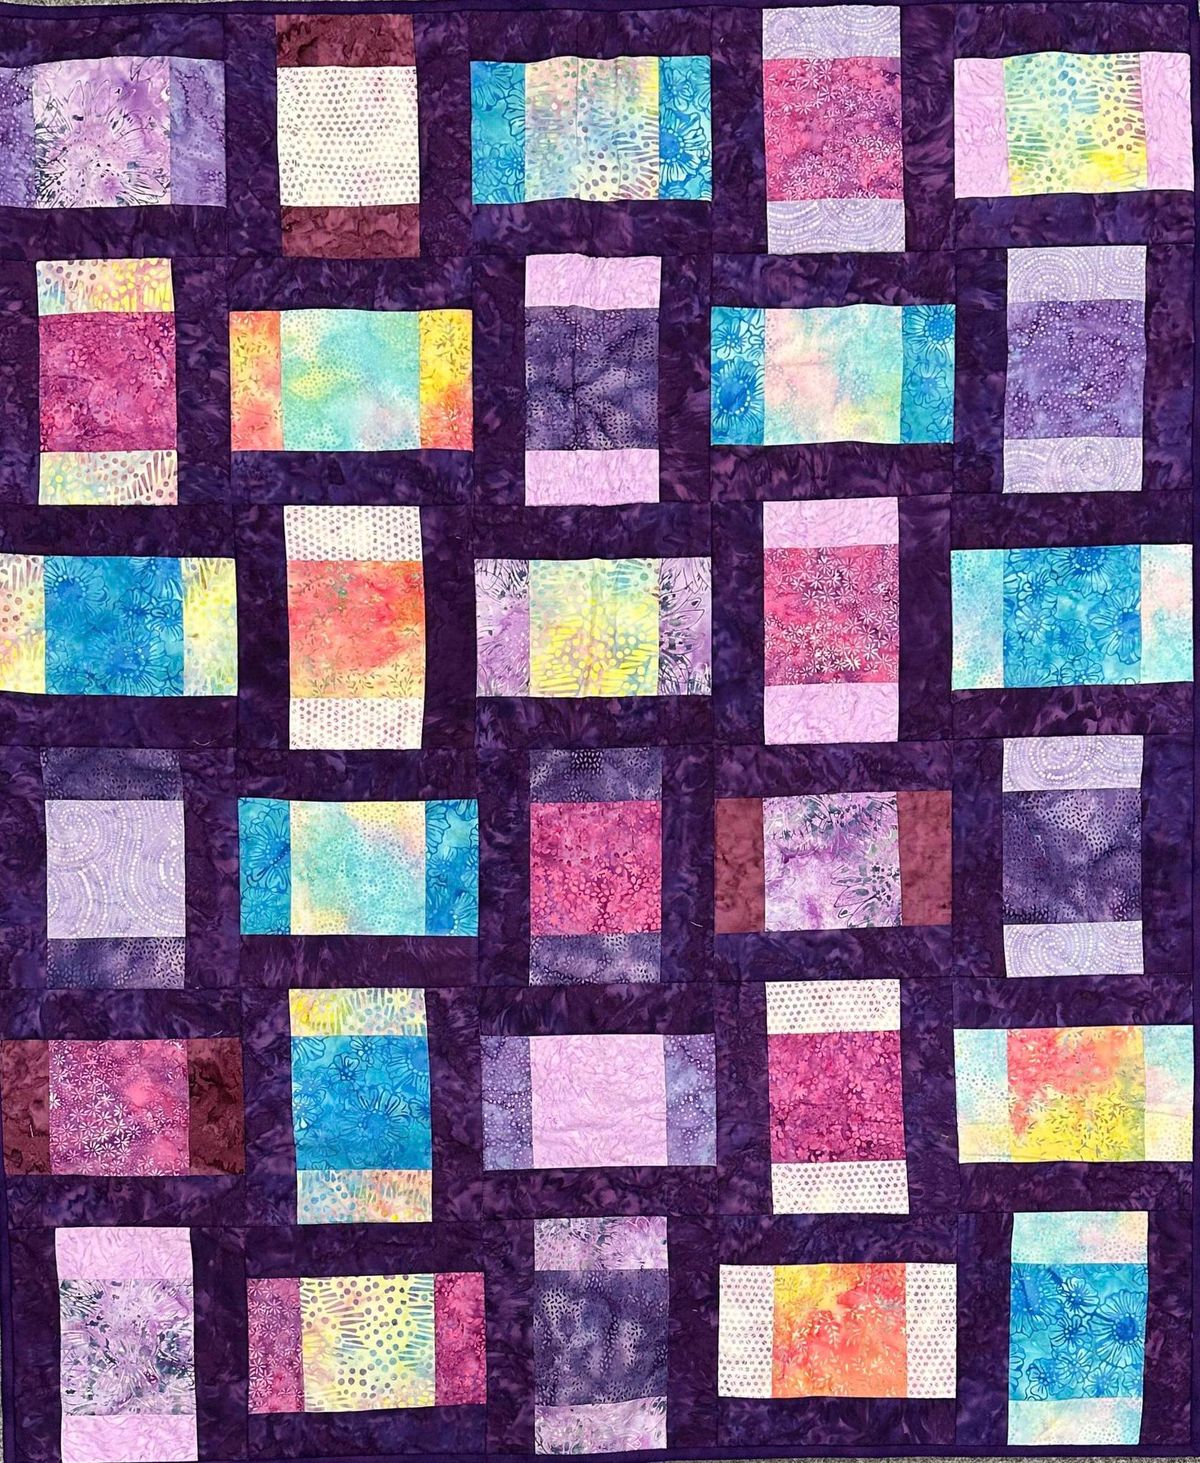 Saturday class - Beginners to Intermediate Patchwork and Quilting with Pat Stone